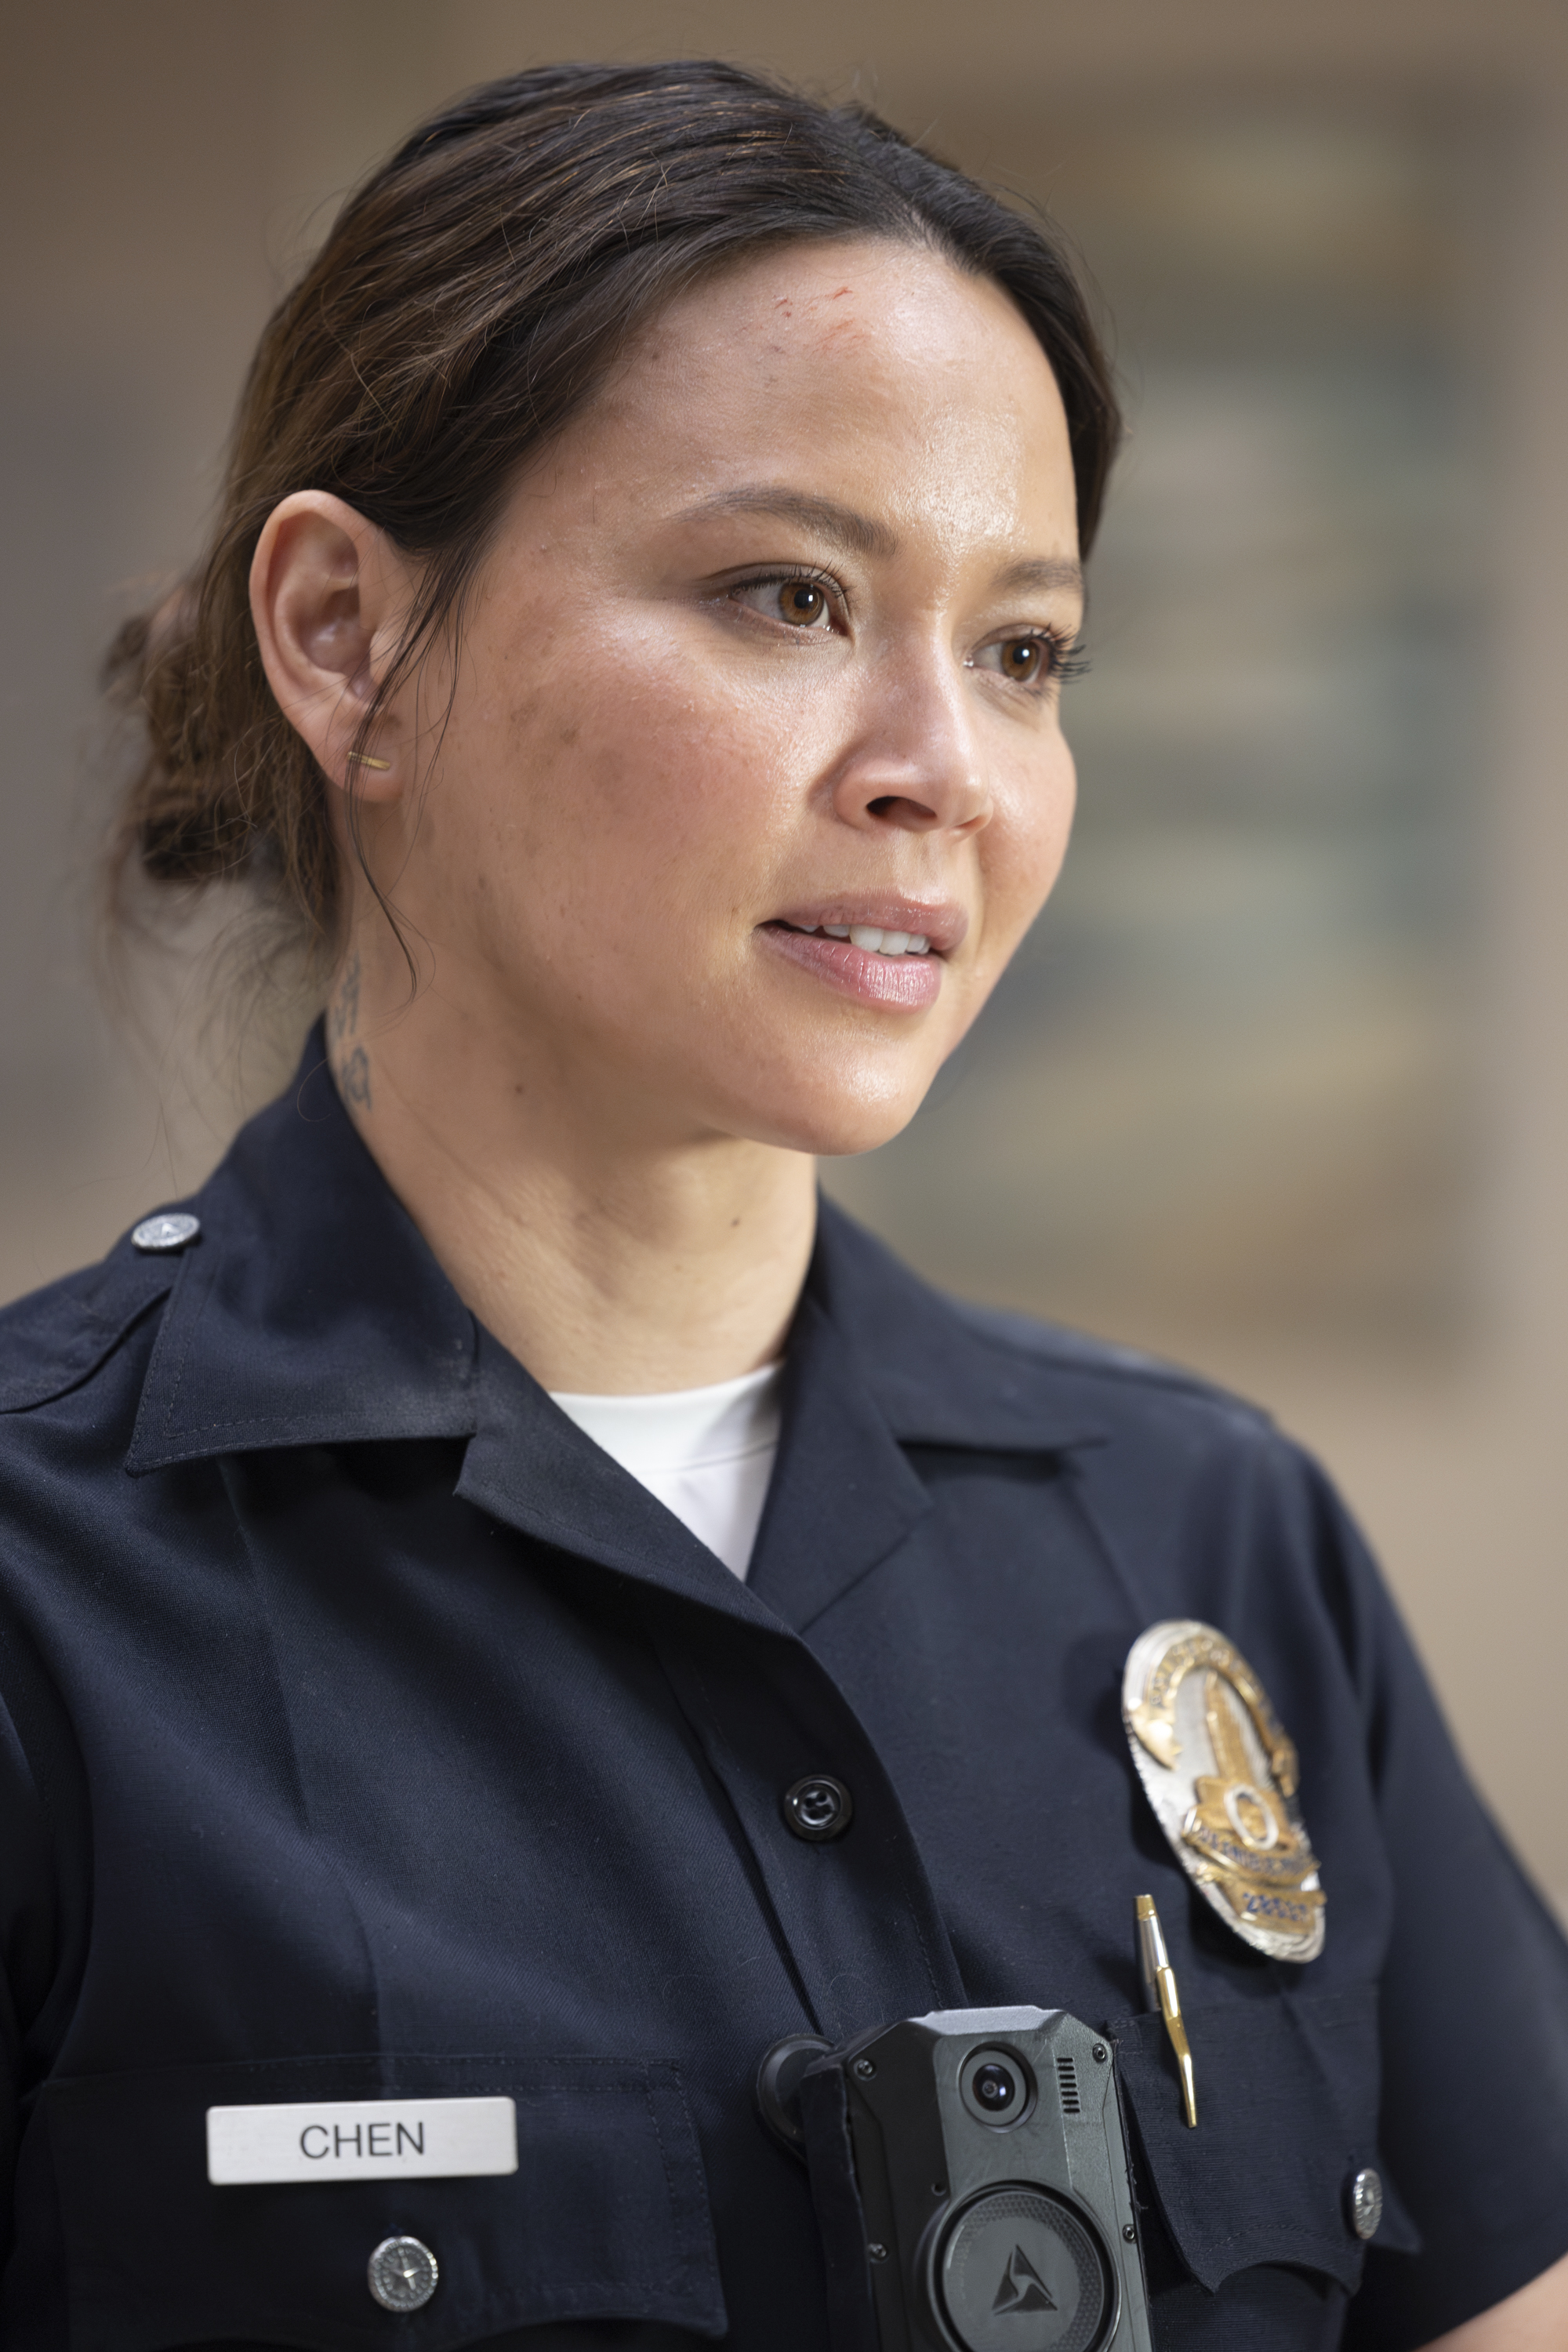 The Rookie 6x08